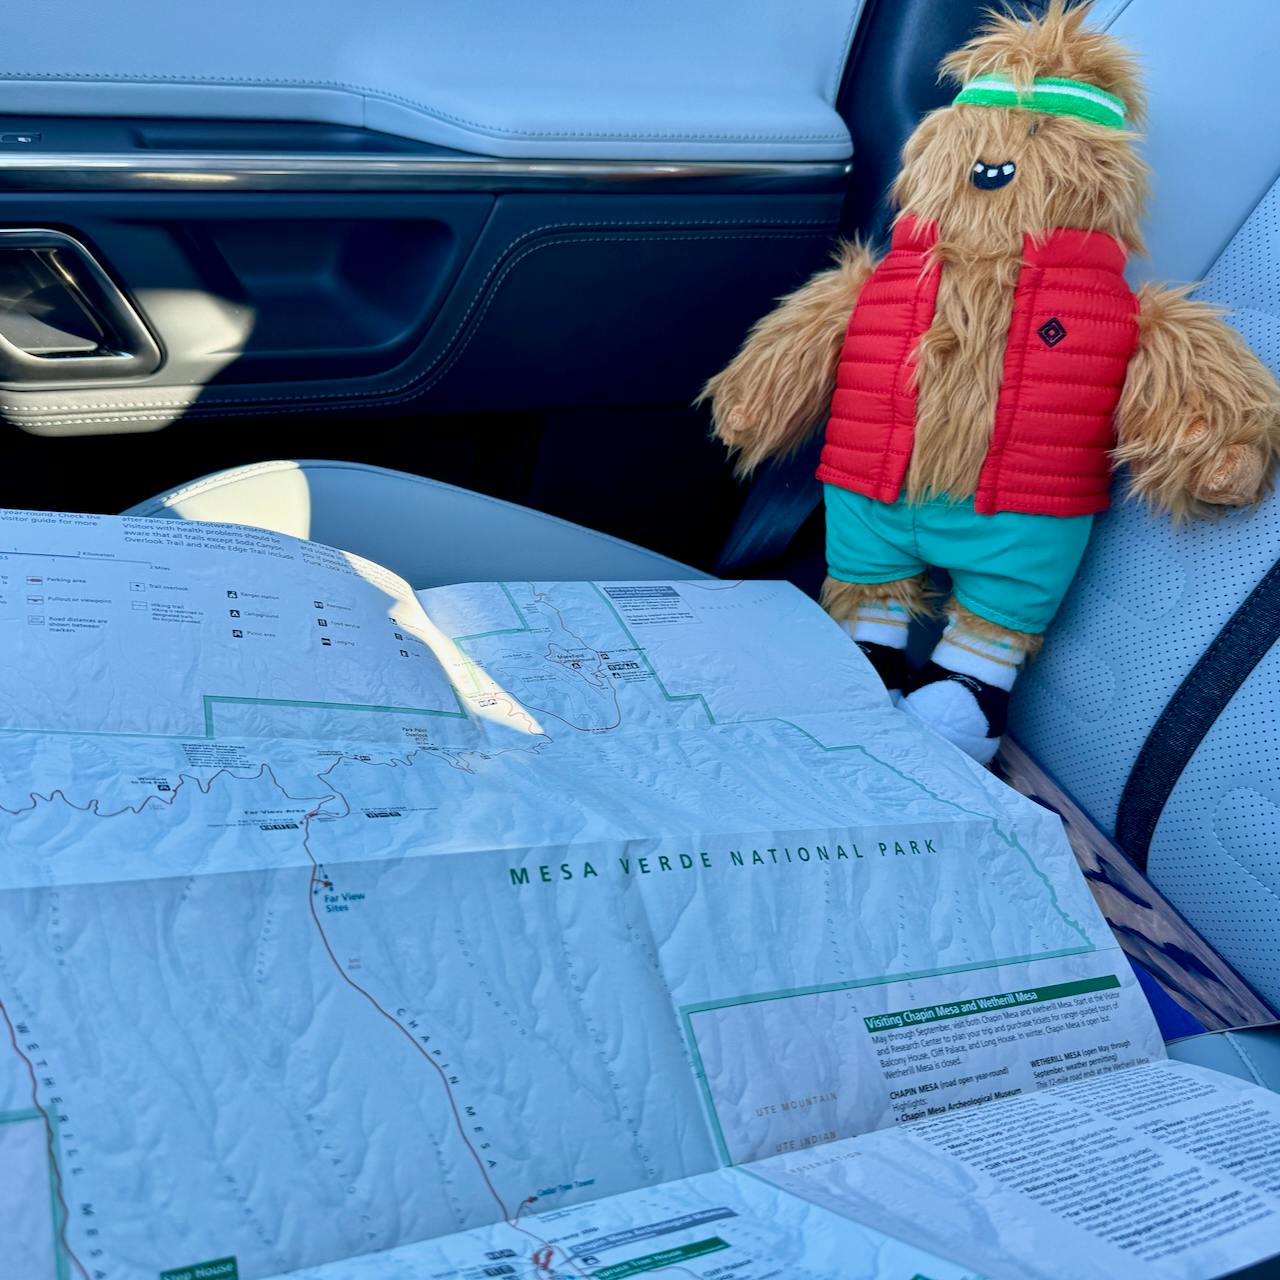 Gear Guard stuffie sitting on the Rivian R1S's passenger seat, looking over a map of Mesa Verde National Park